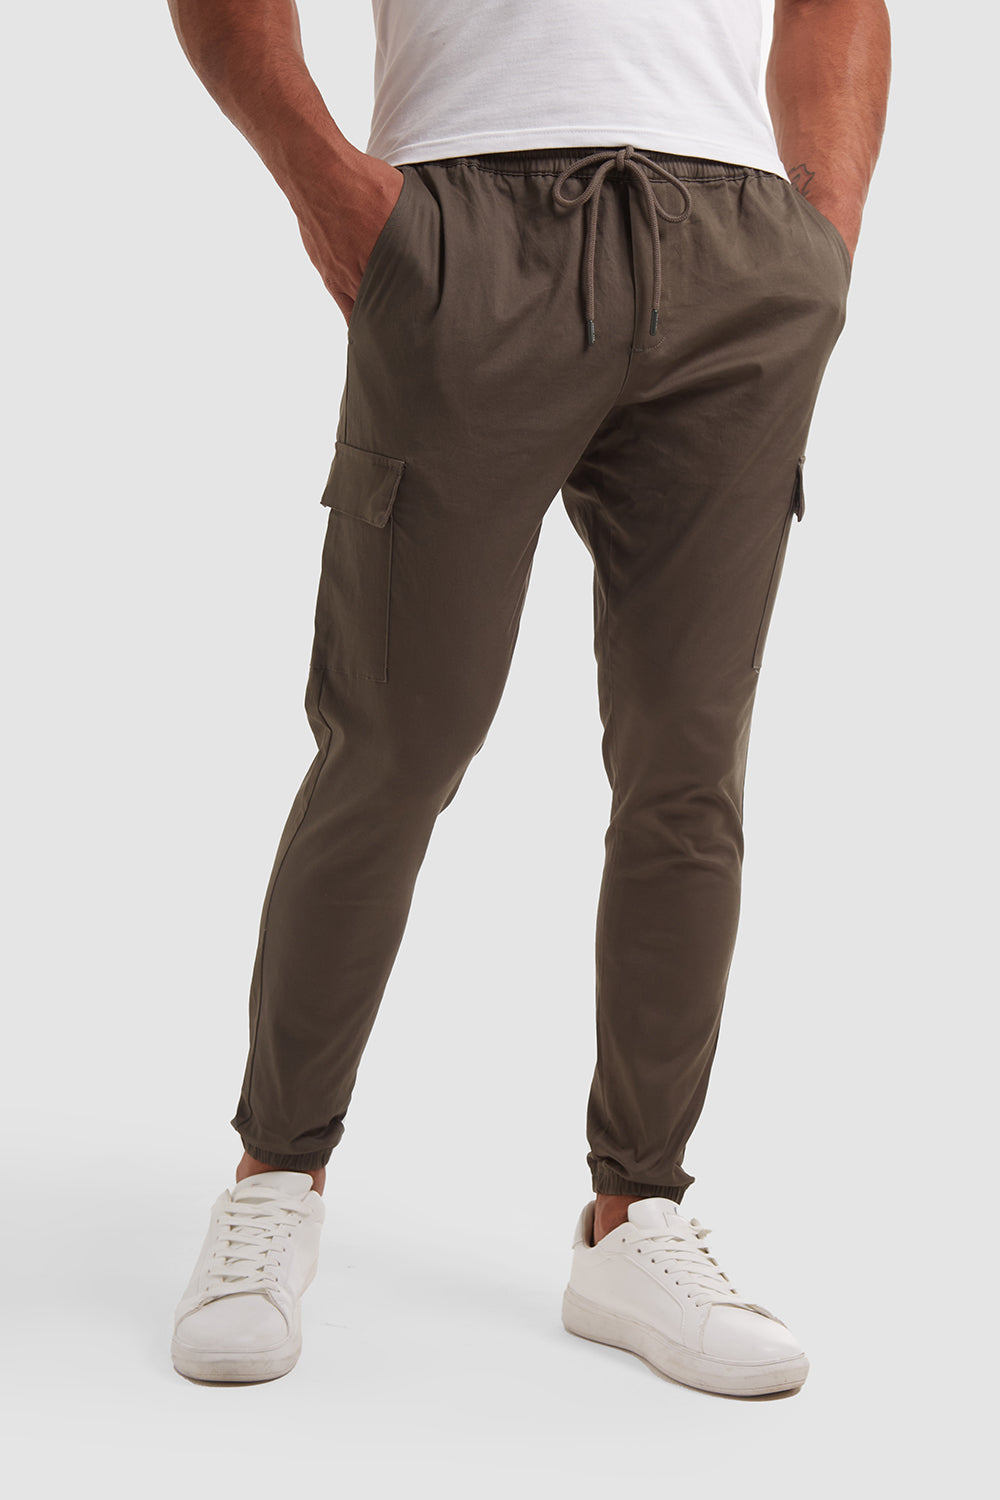 Loose fit cargo pants with 20% discount!